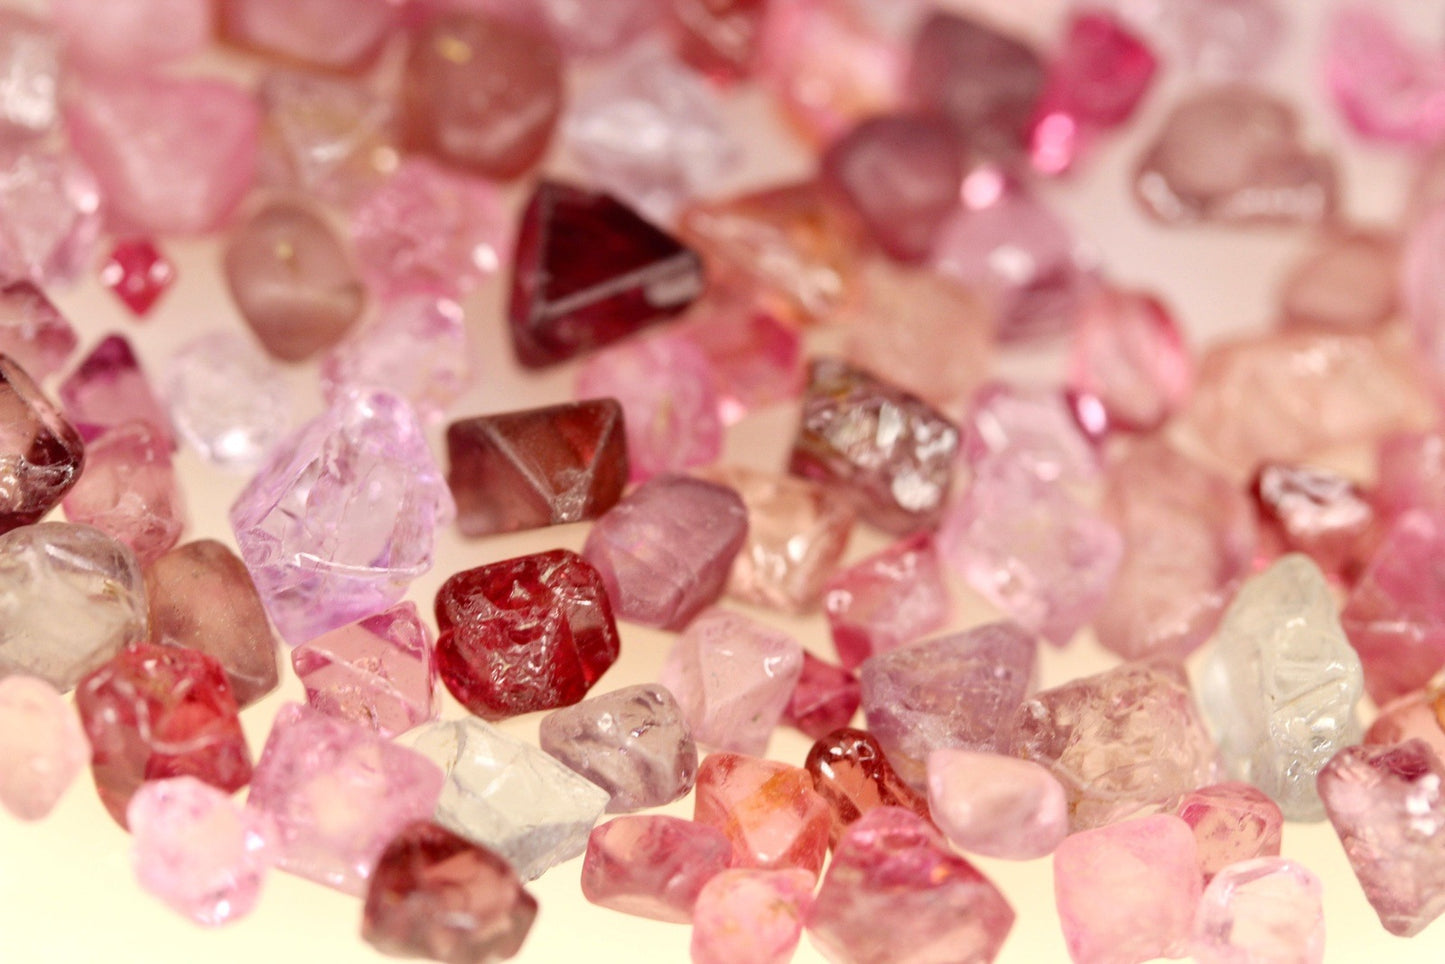 Genuine spinel crystals for purchase